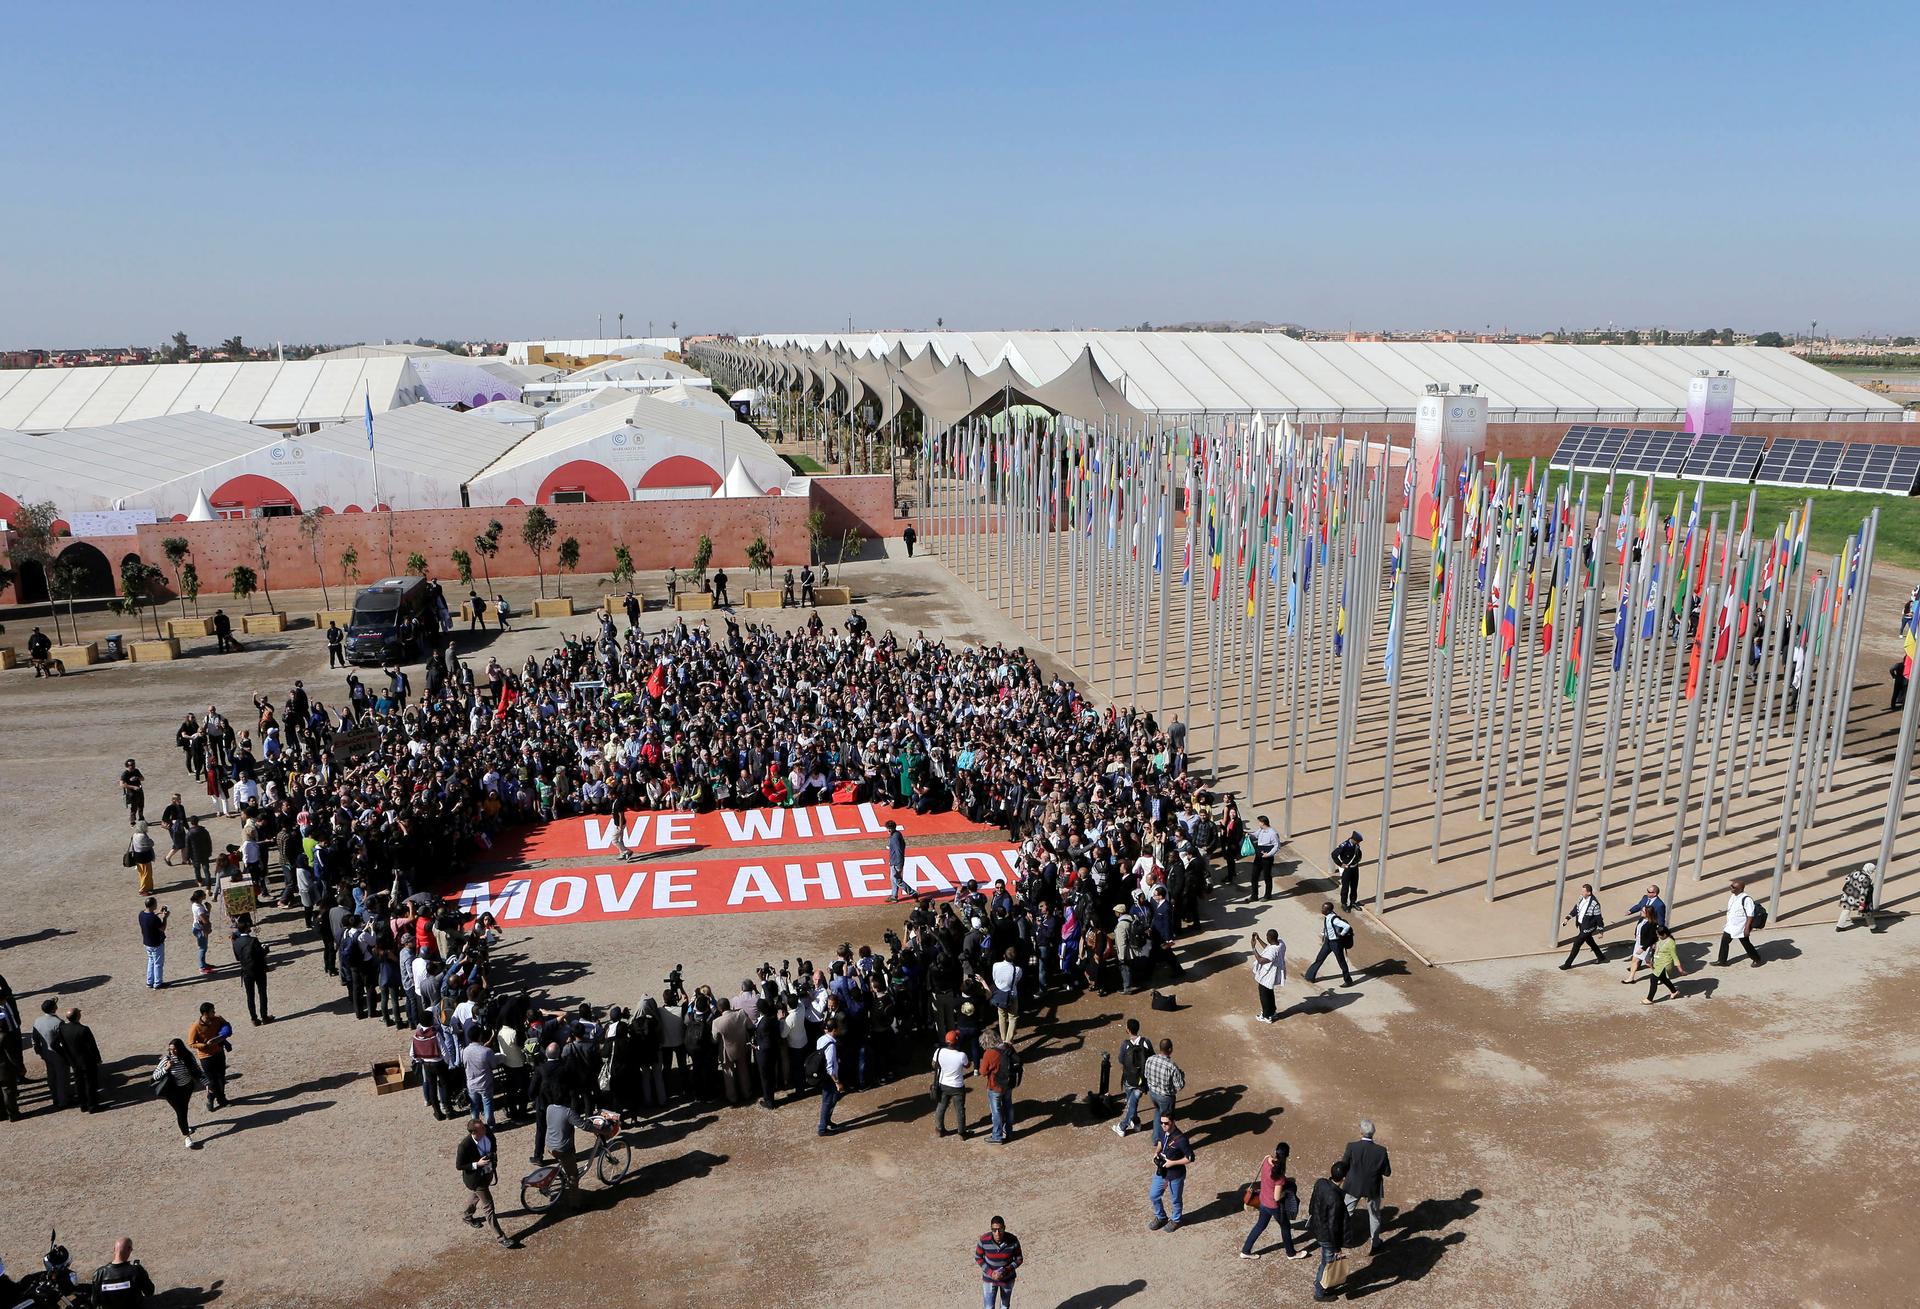 Climate activists protest outside this month's UN Climate Change Conference in Marrakech. Activists and officials are strugling to find a way forward for last year's landmark Paris Agreement on climate change after the US presidential election.